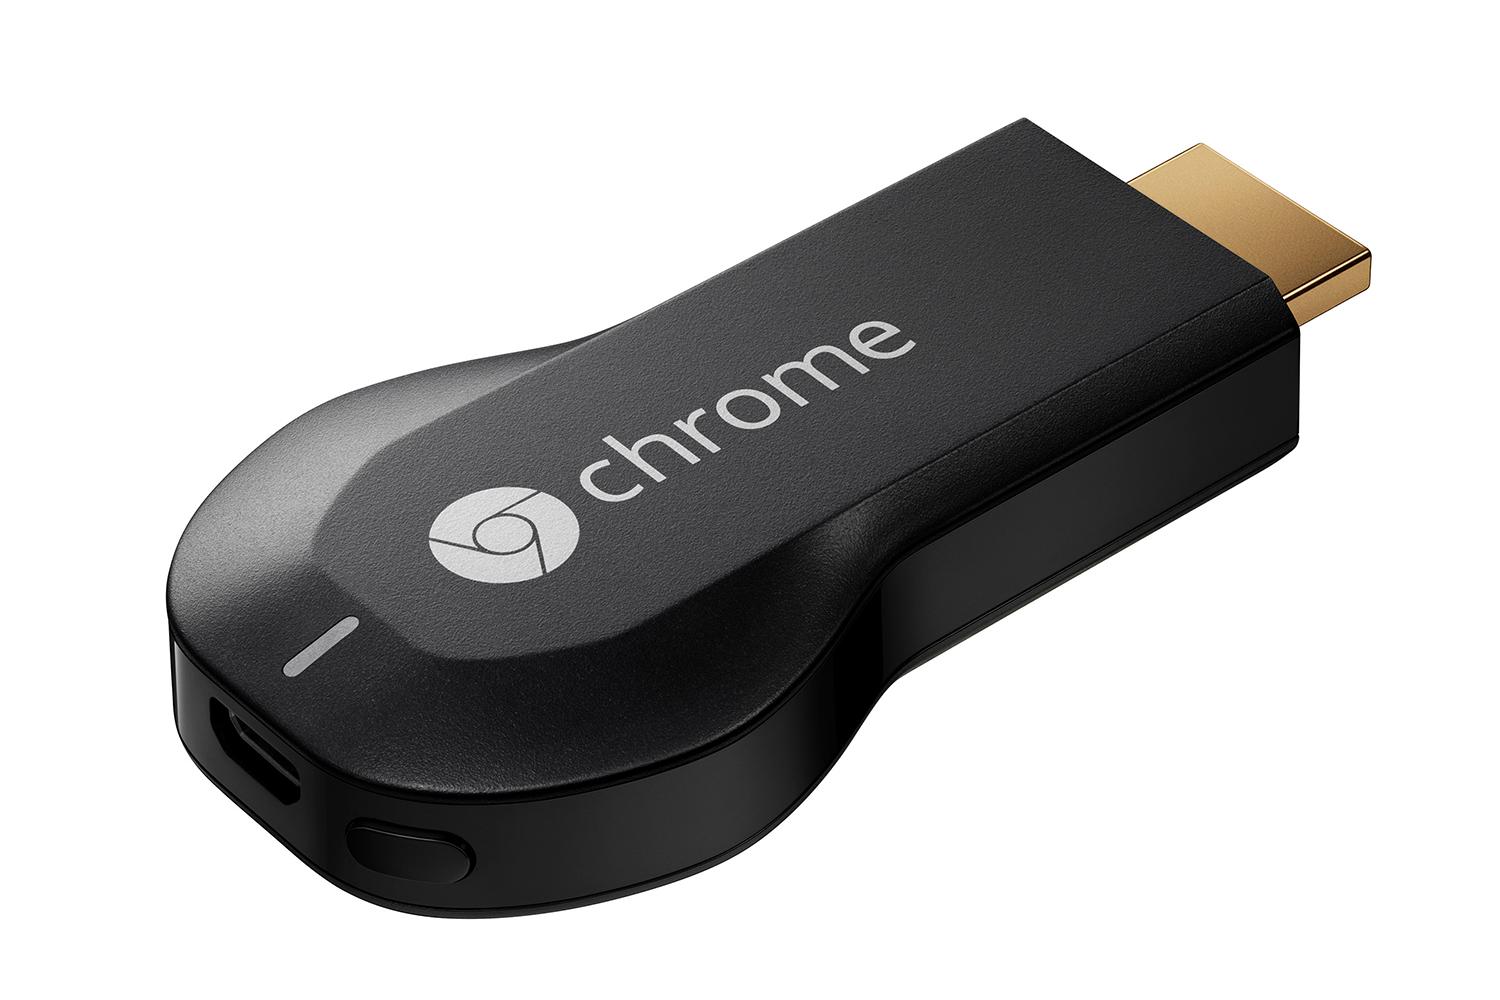 Review: Chromecast is for inexpensive